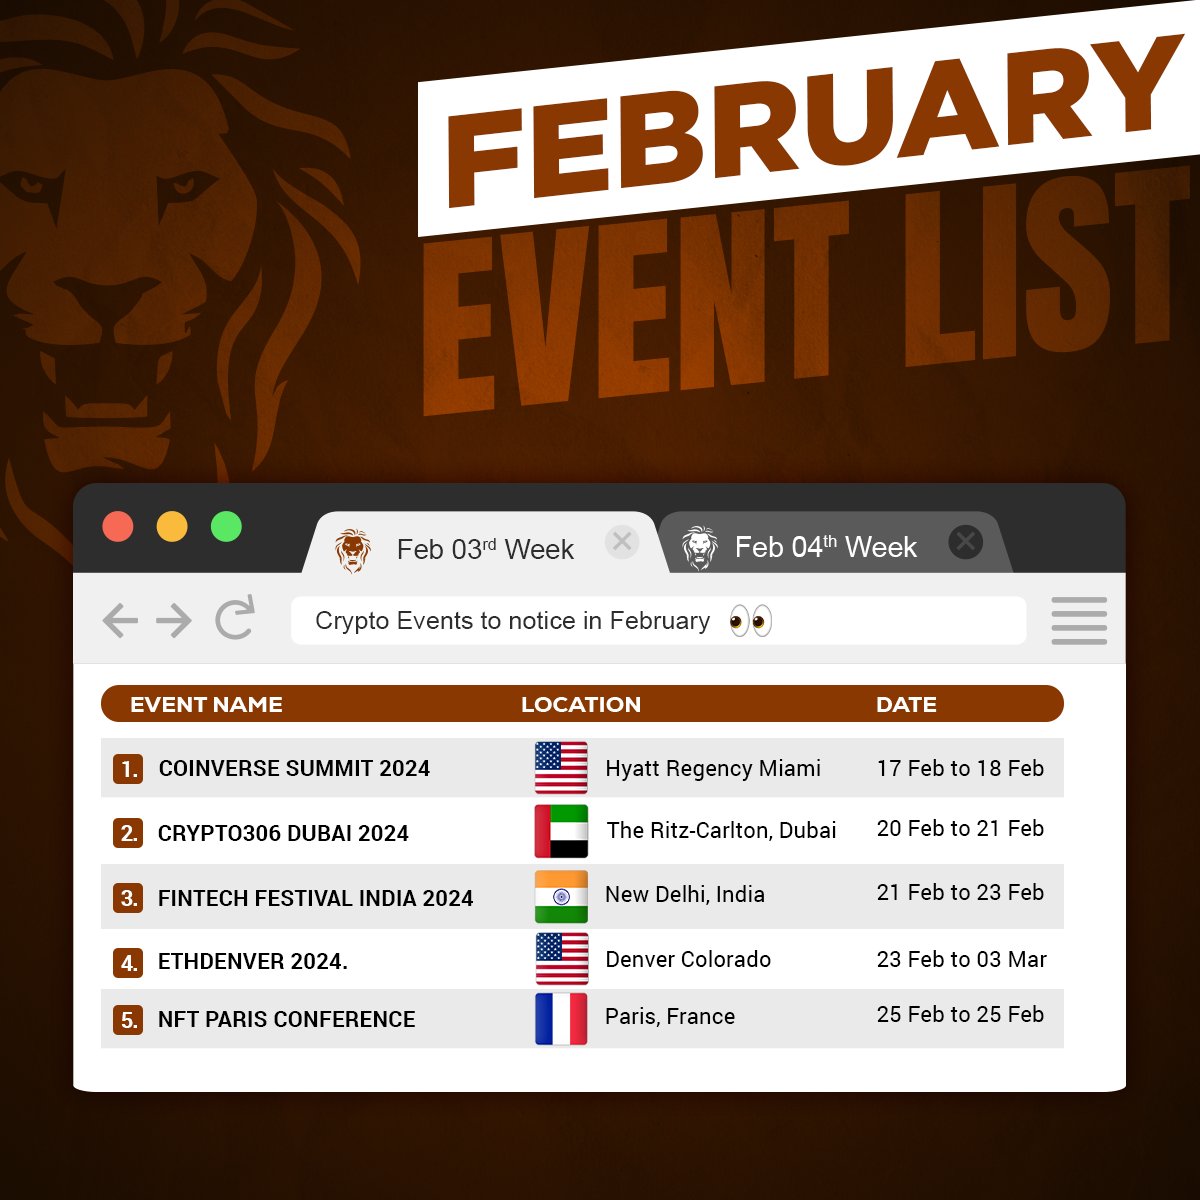 🔥#CryptoEvents To Notice In February 🔥

1 #COINVERSESUMMIT 2024
2 #CRYPTO306DUBAI 2024
3 #FINTECH FESTIVAL INDIA 2024
4 #ETHDENVER2024
5 #NFTPARISCONFERENCE

📅Read More Events: coingabbar.com/en/coin-events…

#Event #CryptoEvent #CoinGabbar #conference2024 #blockchainsummit…